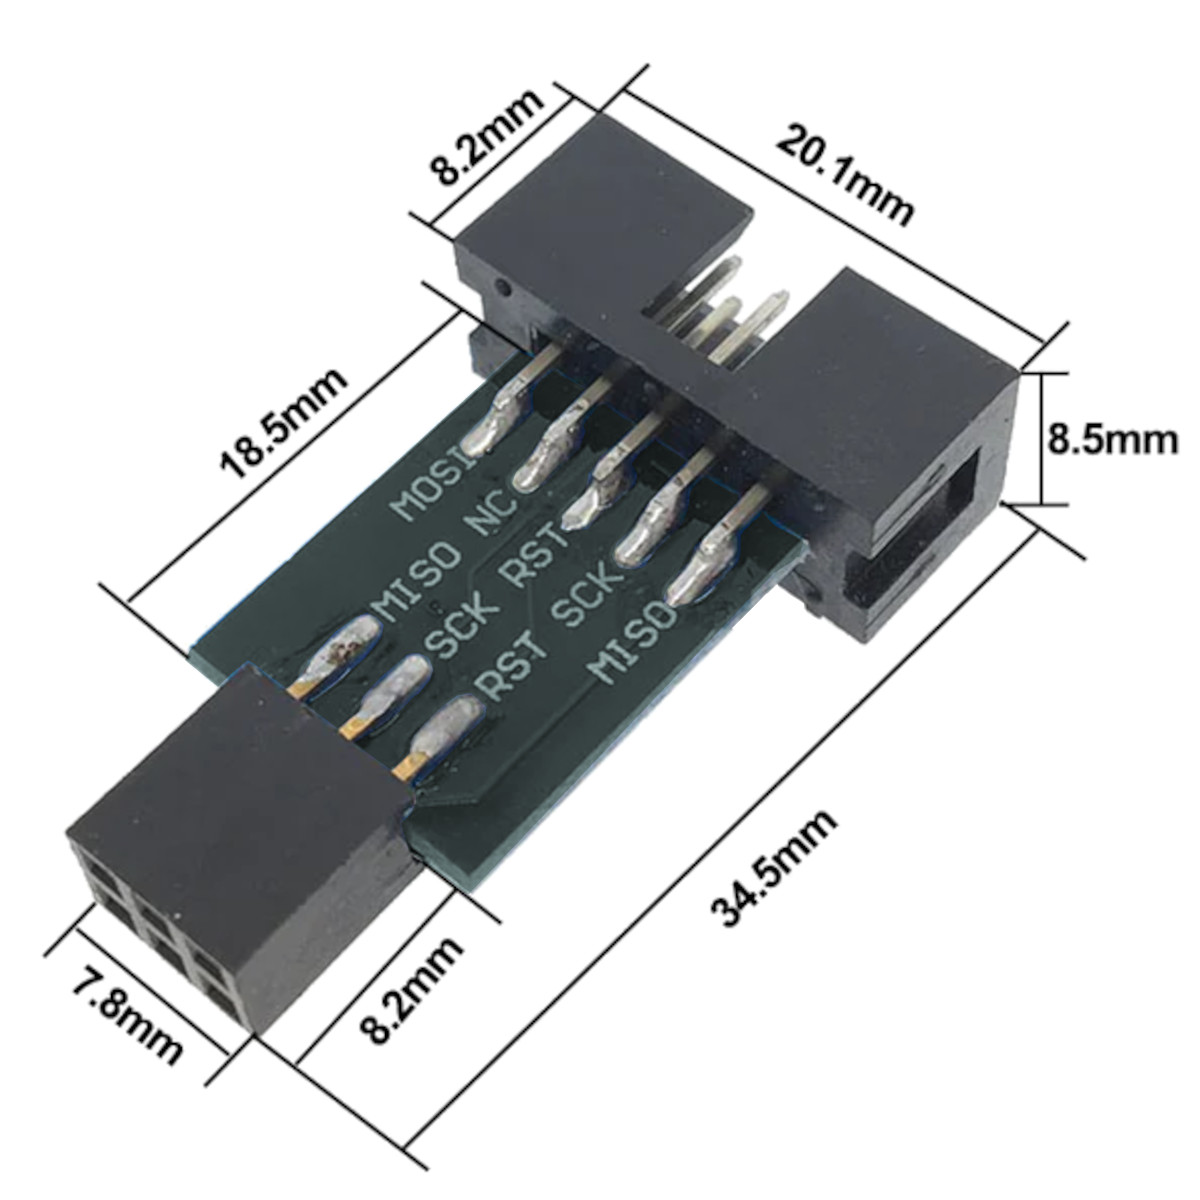 10 Pin to 6 Pin AVR ISP Adapter Board-Dimensions